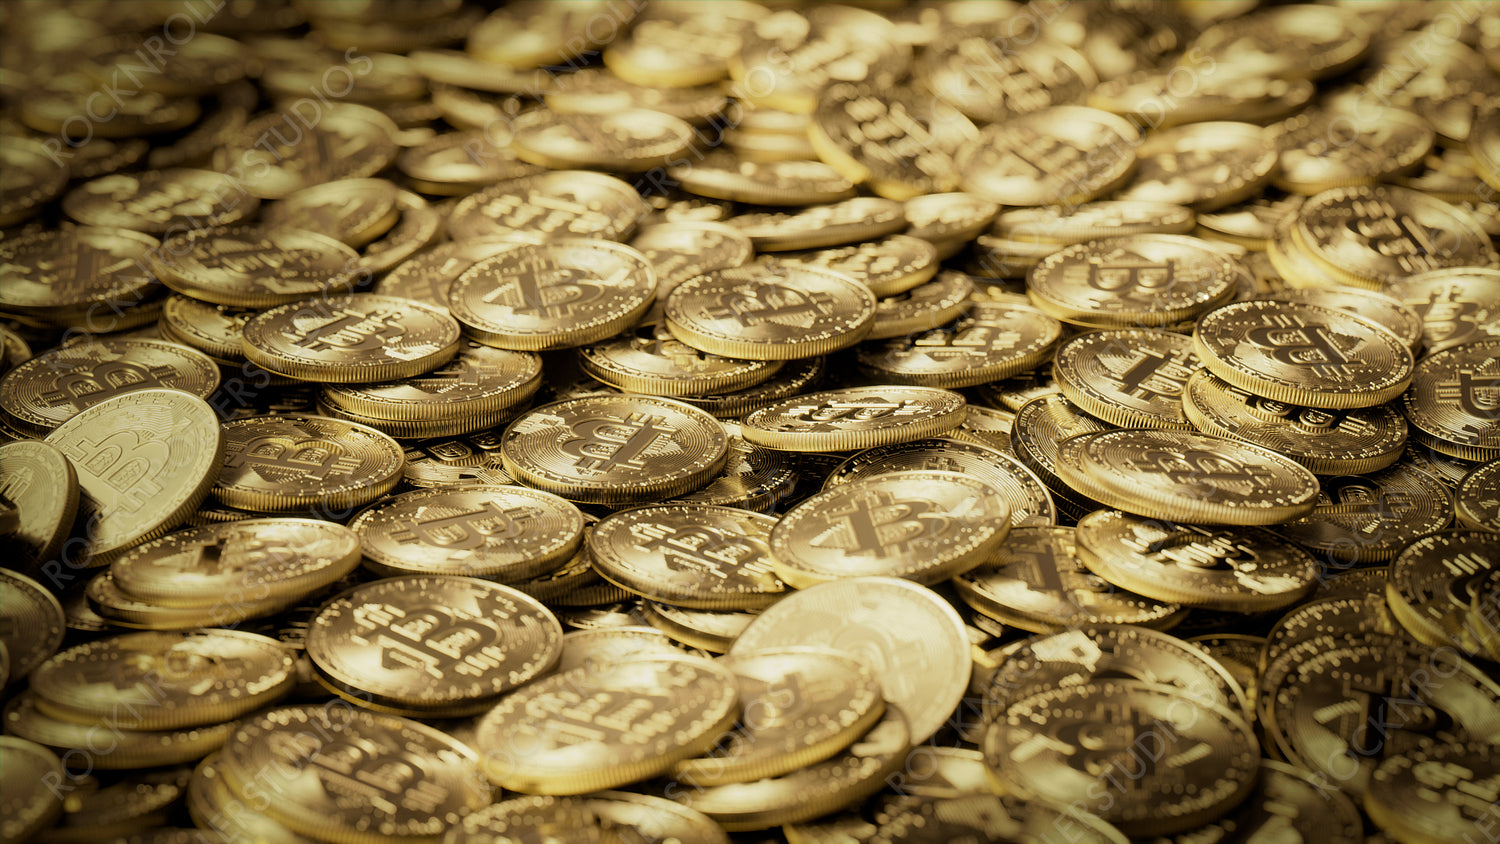 Bitcoin Cryptocurrency represented as Gold Coins. Blockchain Investing Background. 3D Render.